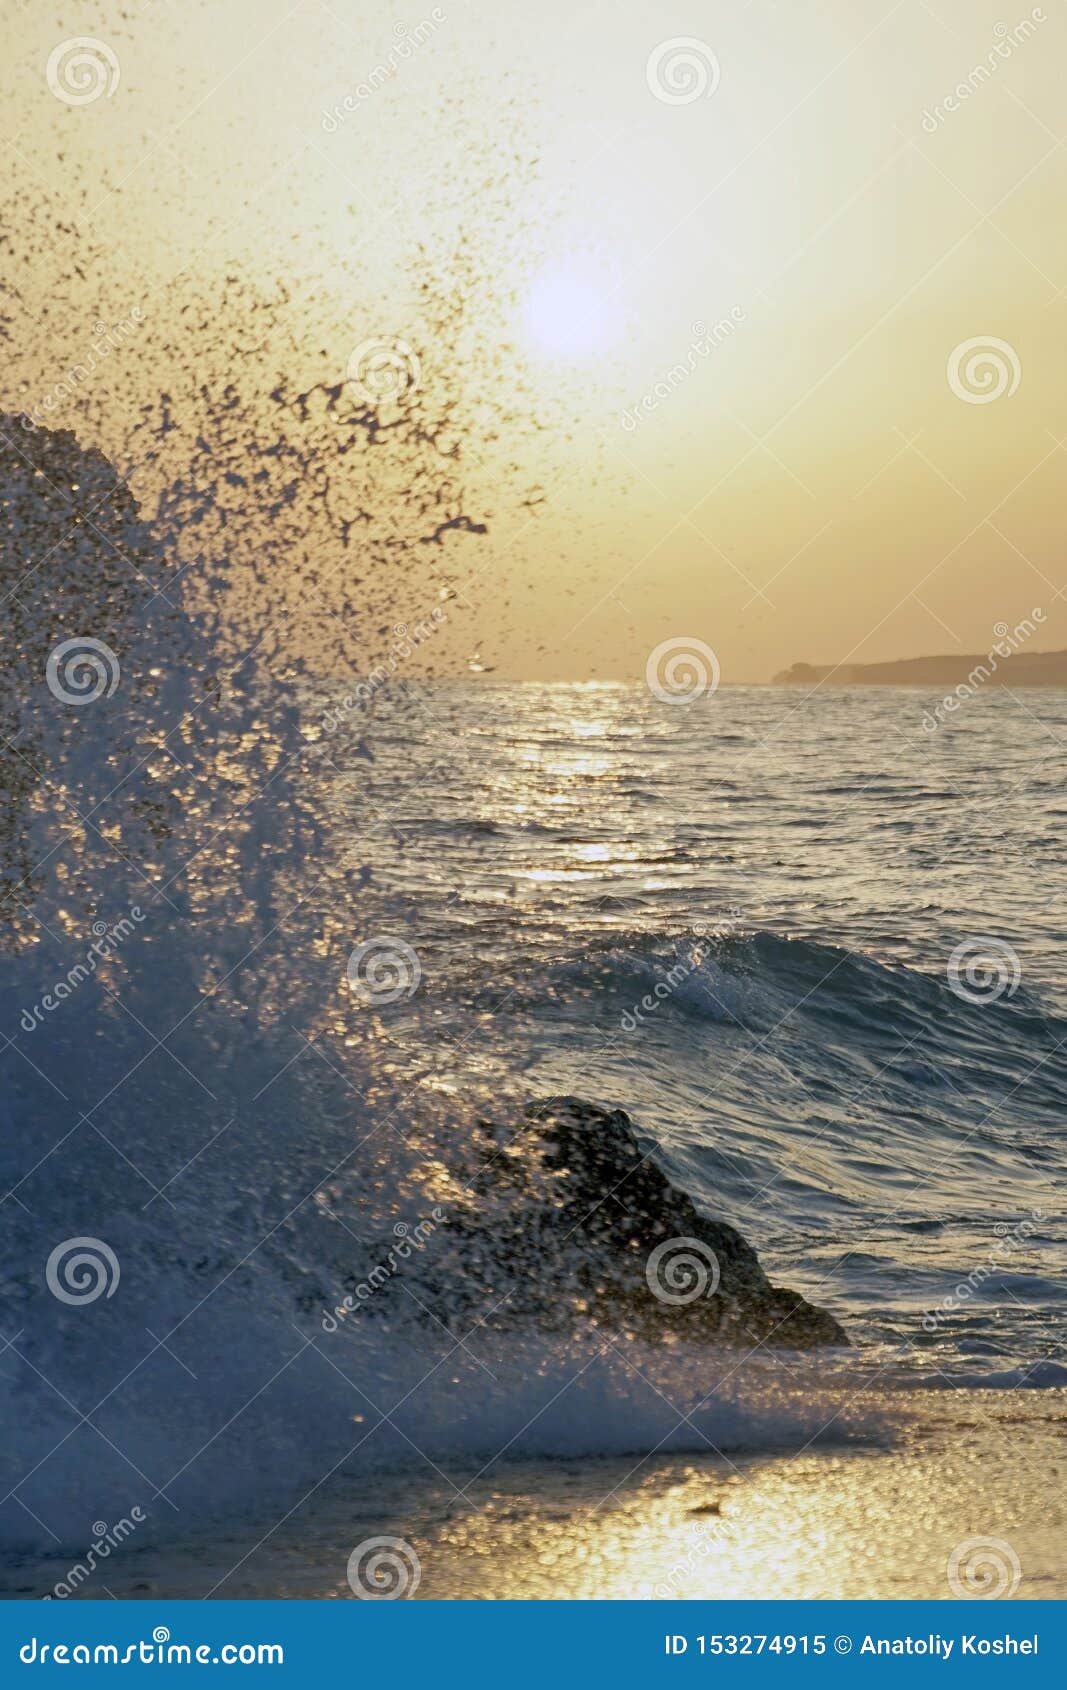 Ocean In The Evening Sunset Over The Waves Clouds And Bright Colors Of The Evening Sky Stock Image Image Of Bright Colors 153274915